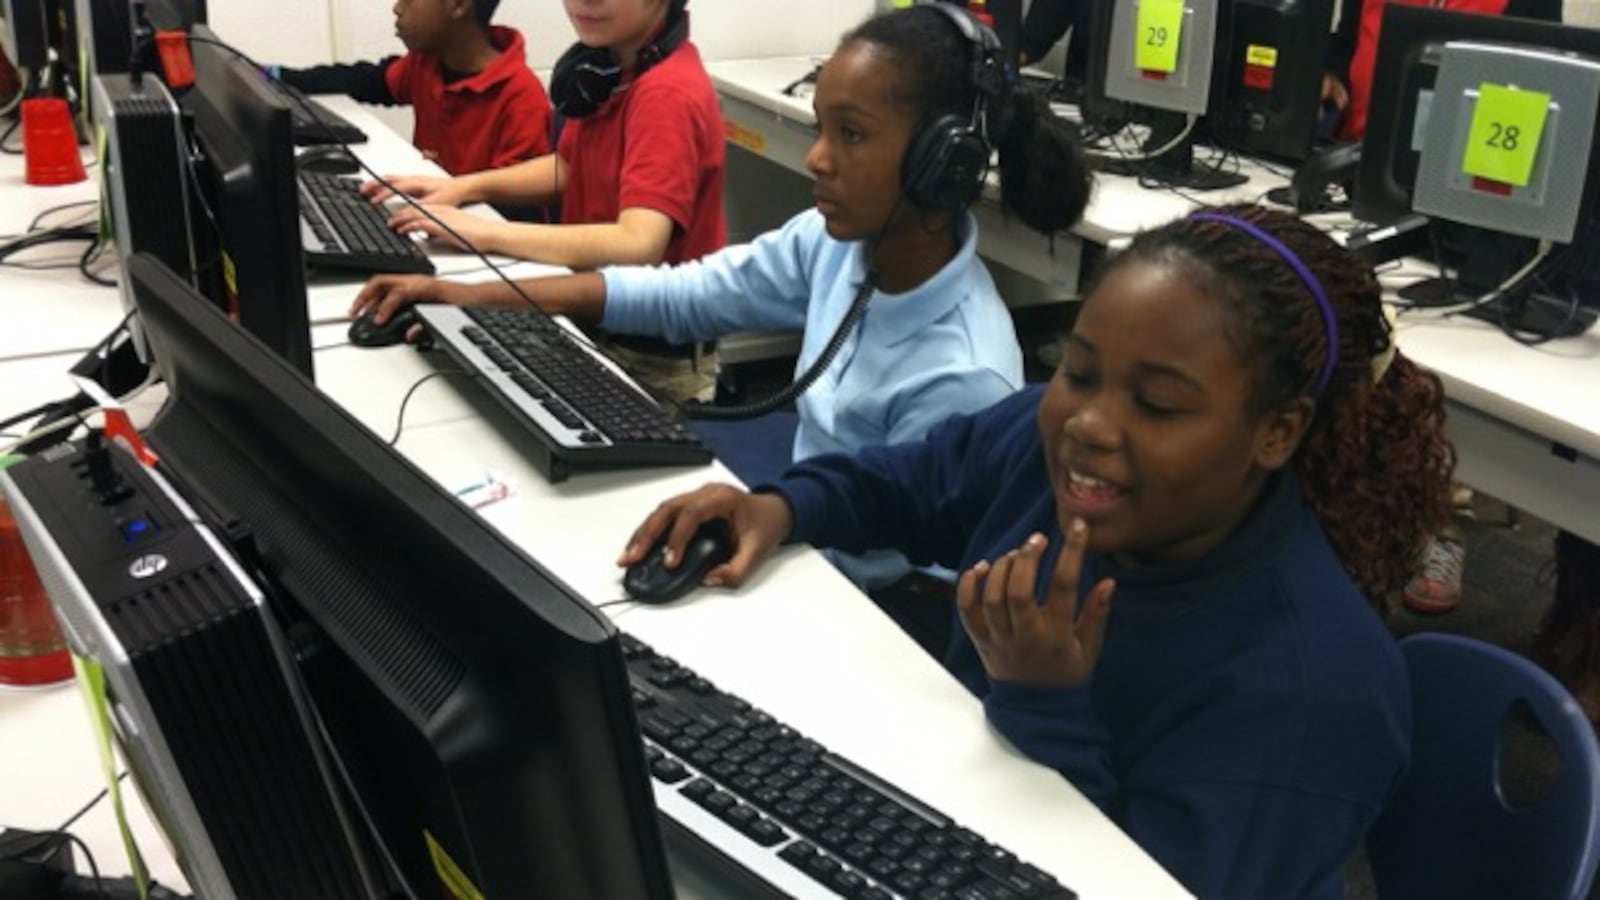 Students use computers at Key Learning Community in 2014.